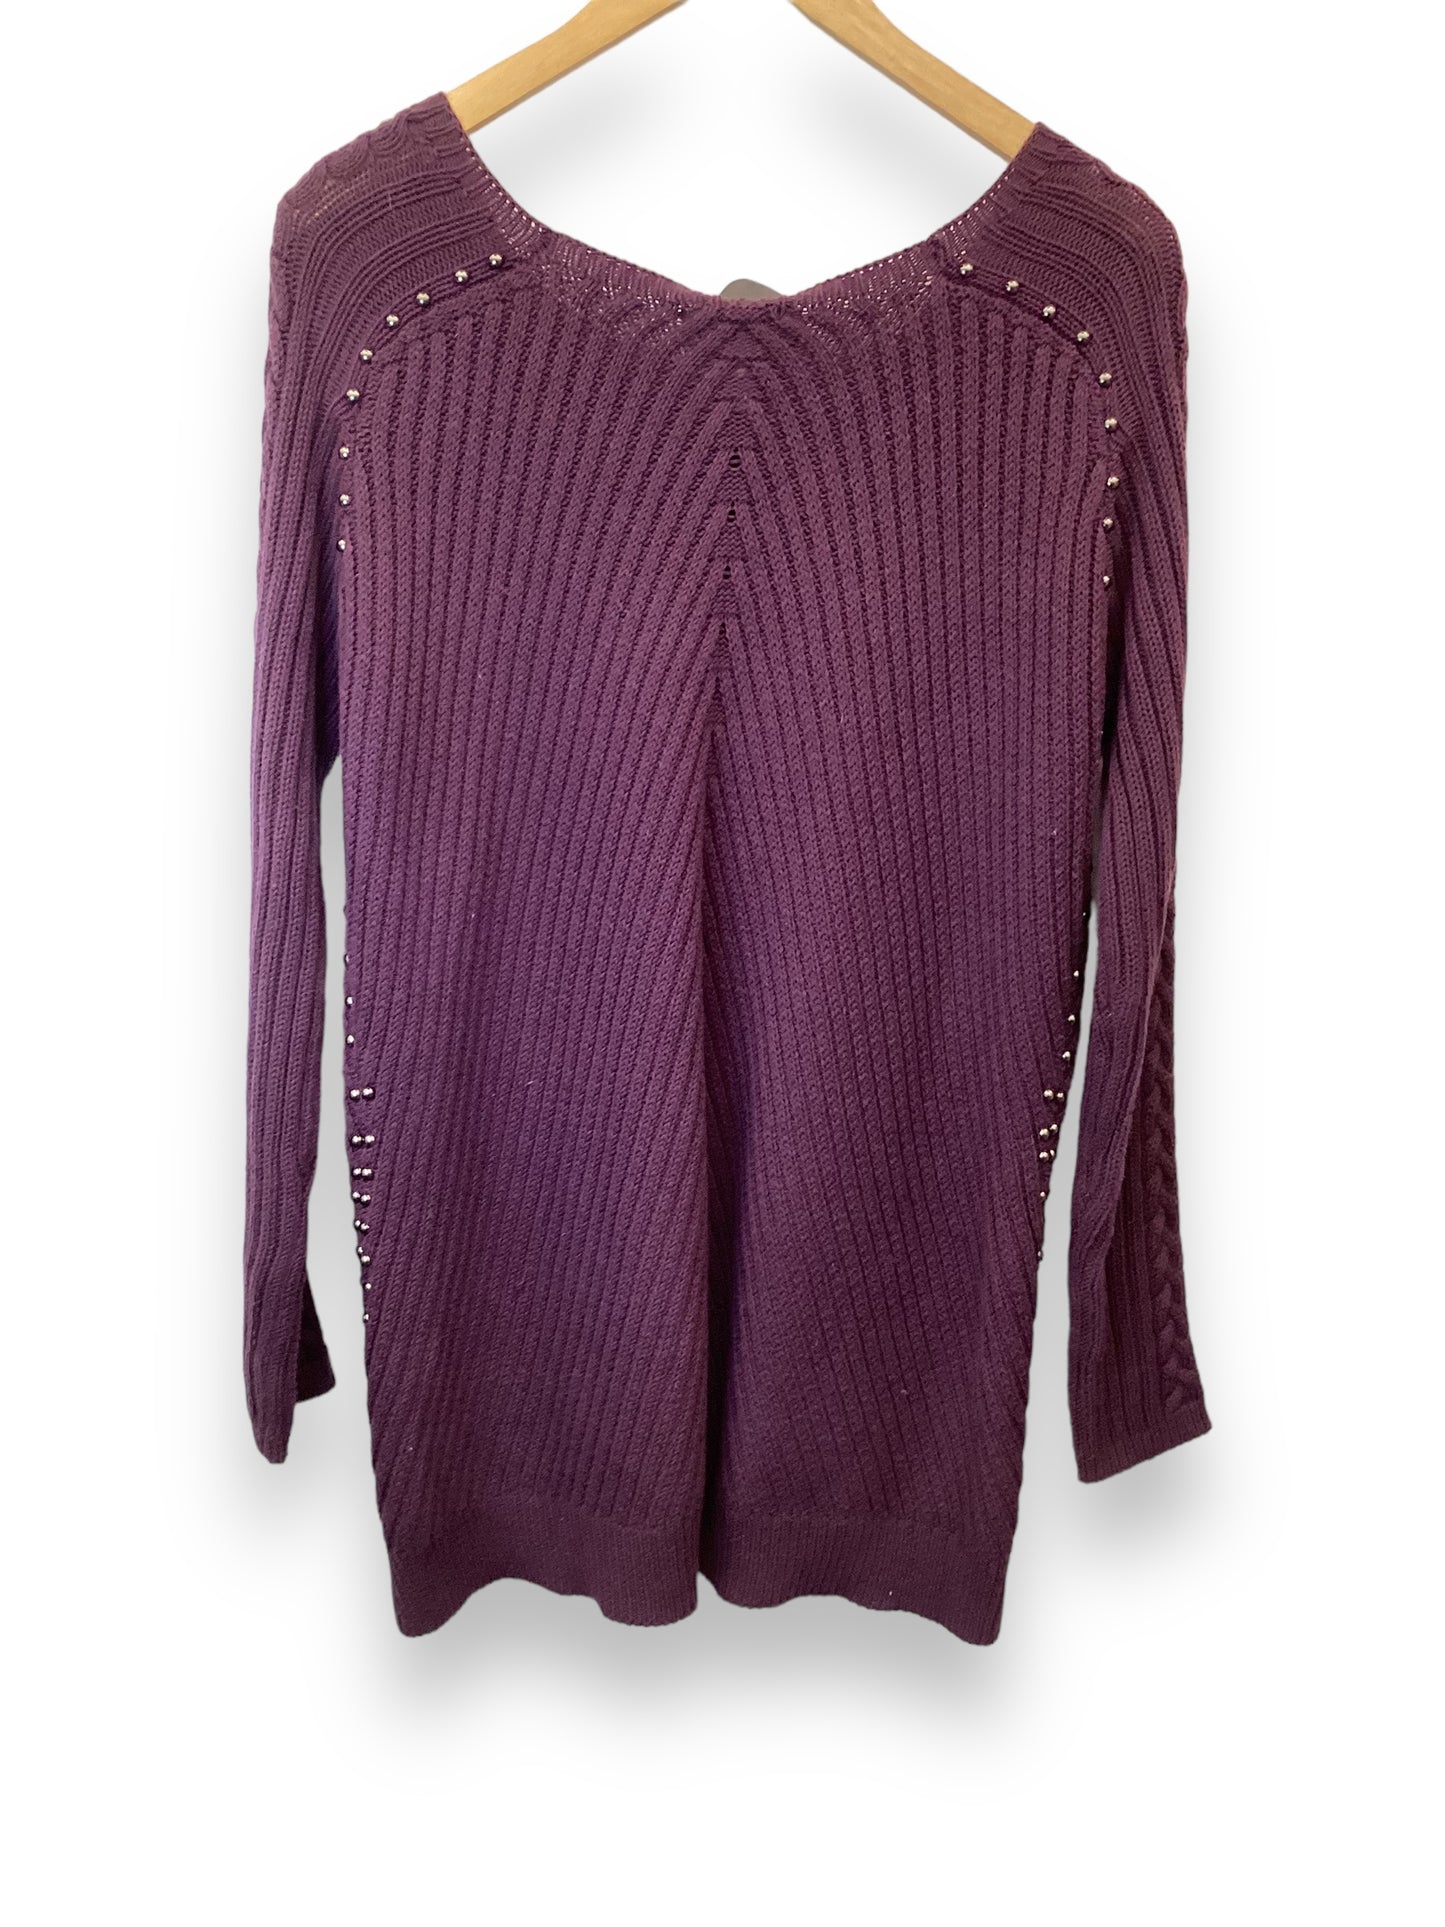 Sweater By Andrea Jovine  Size: Xxl